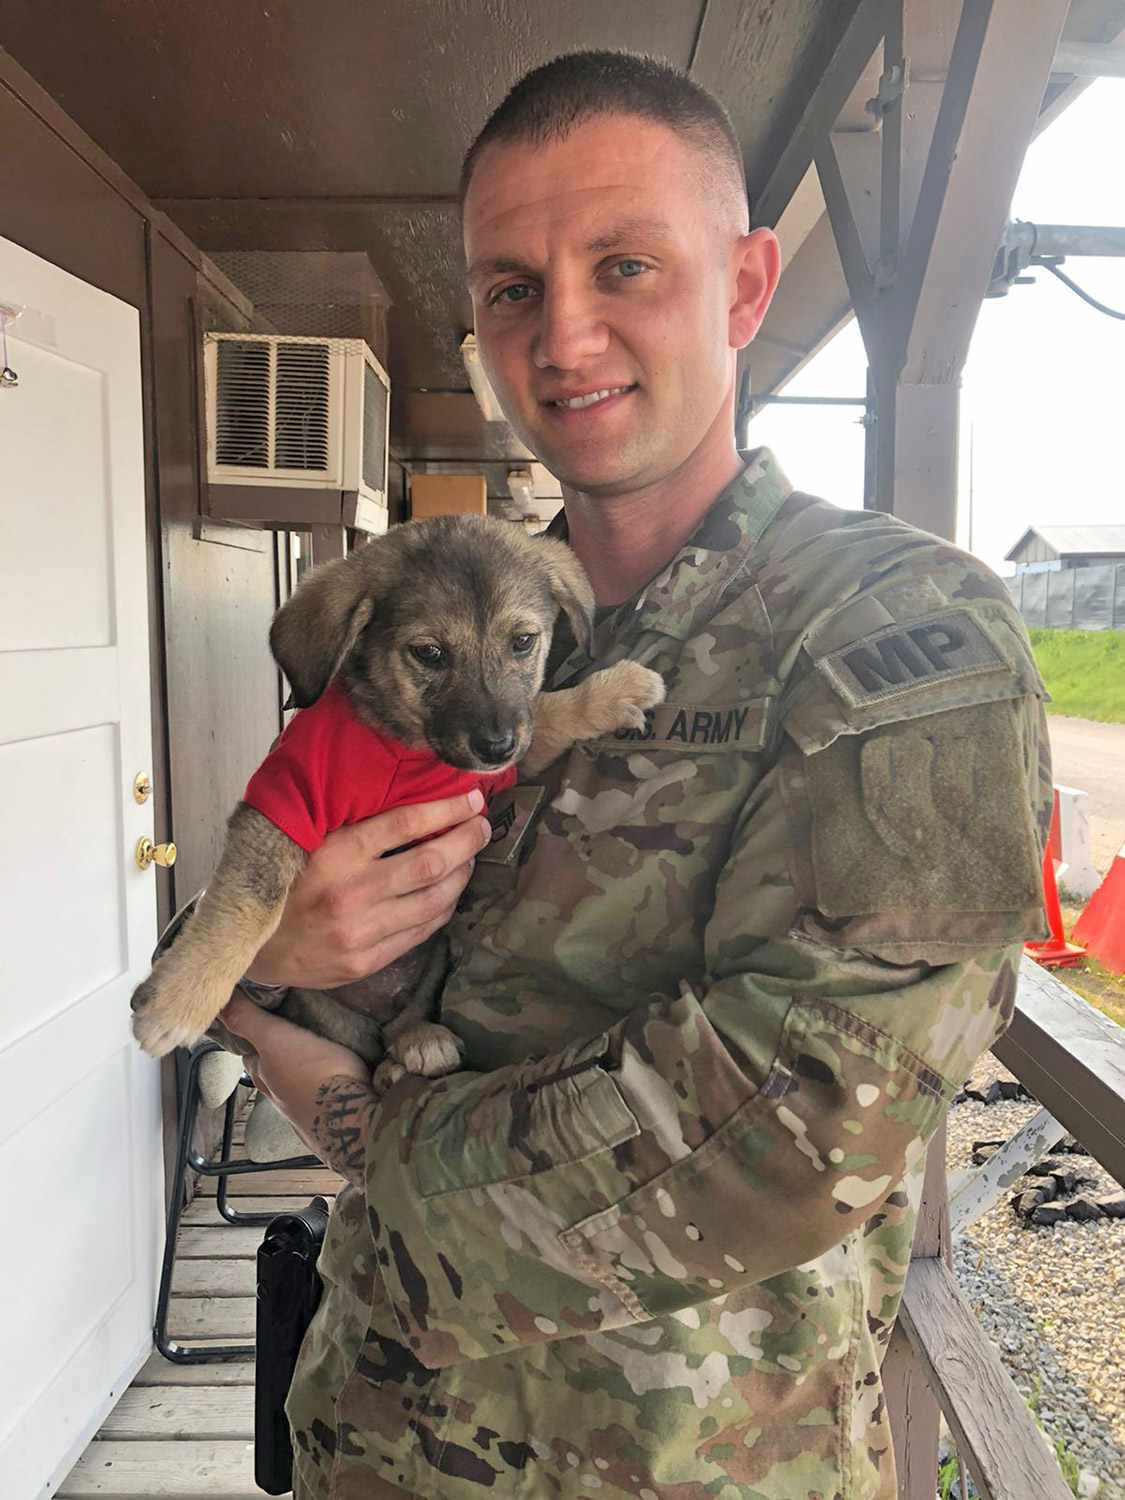 A US soldier rescued a puppy overseas and is now looking for a home for the little one.